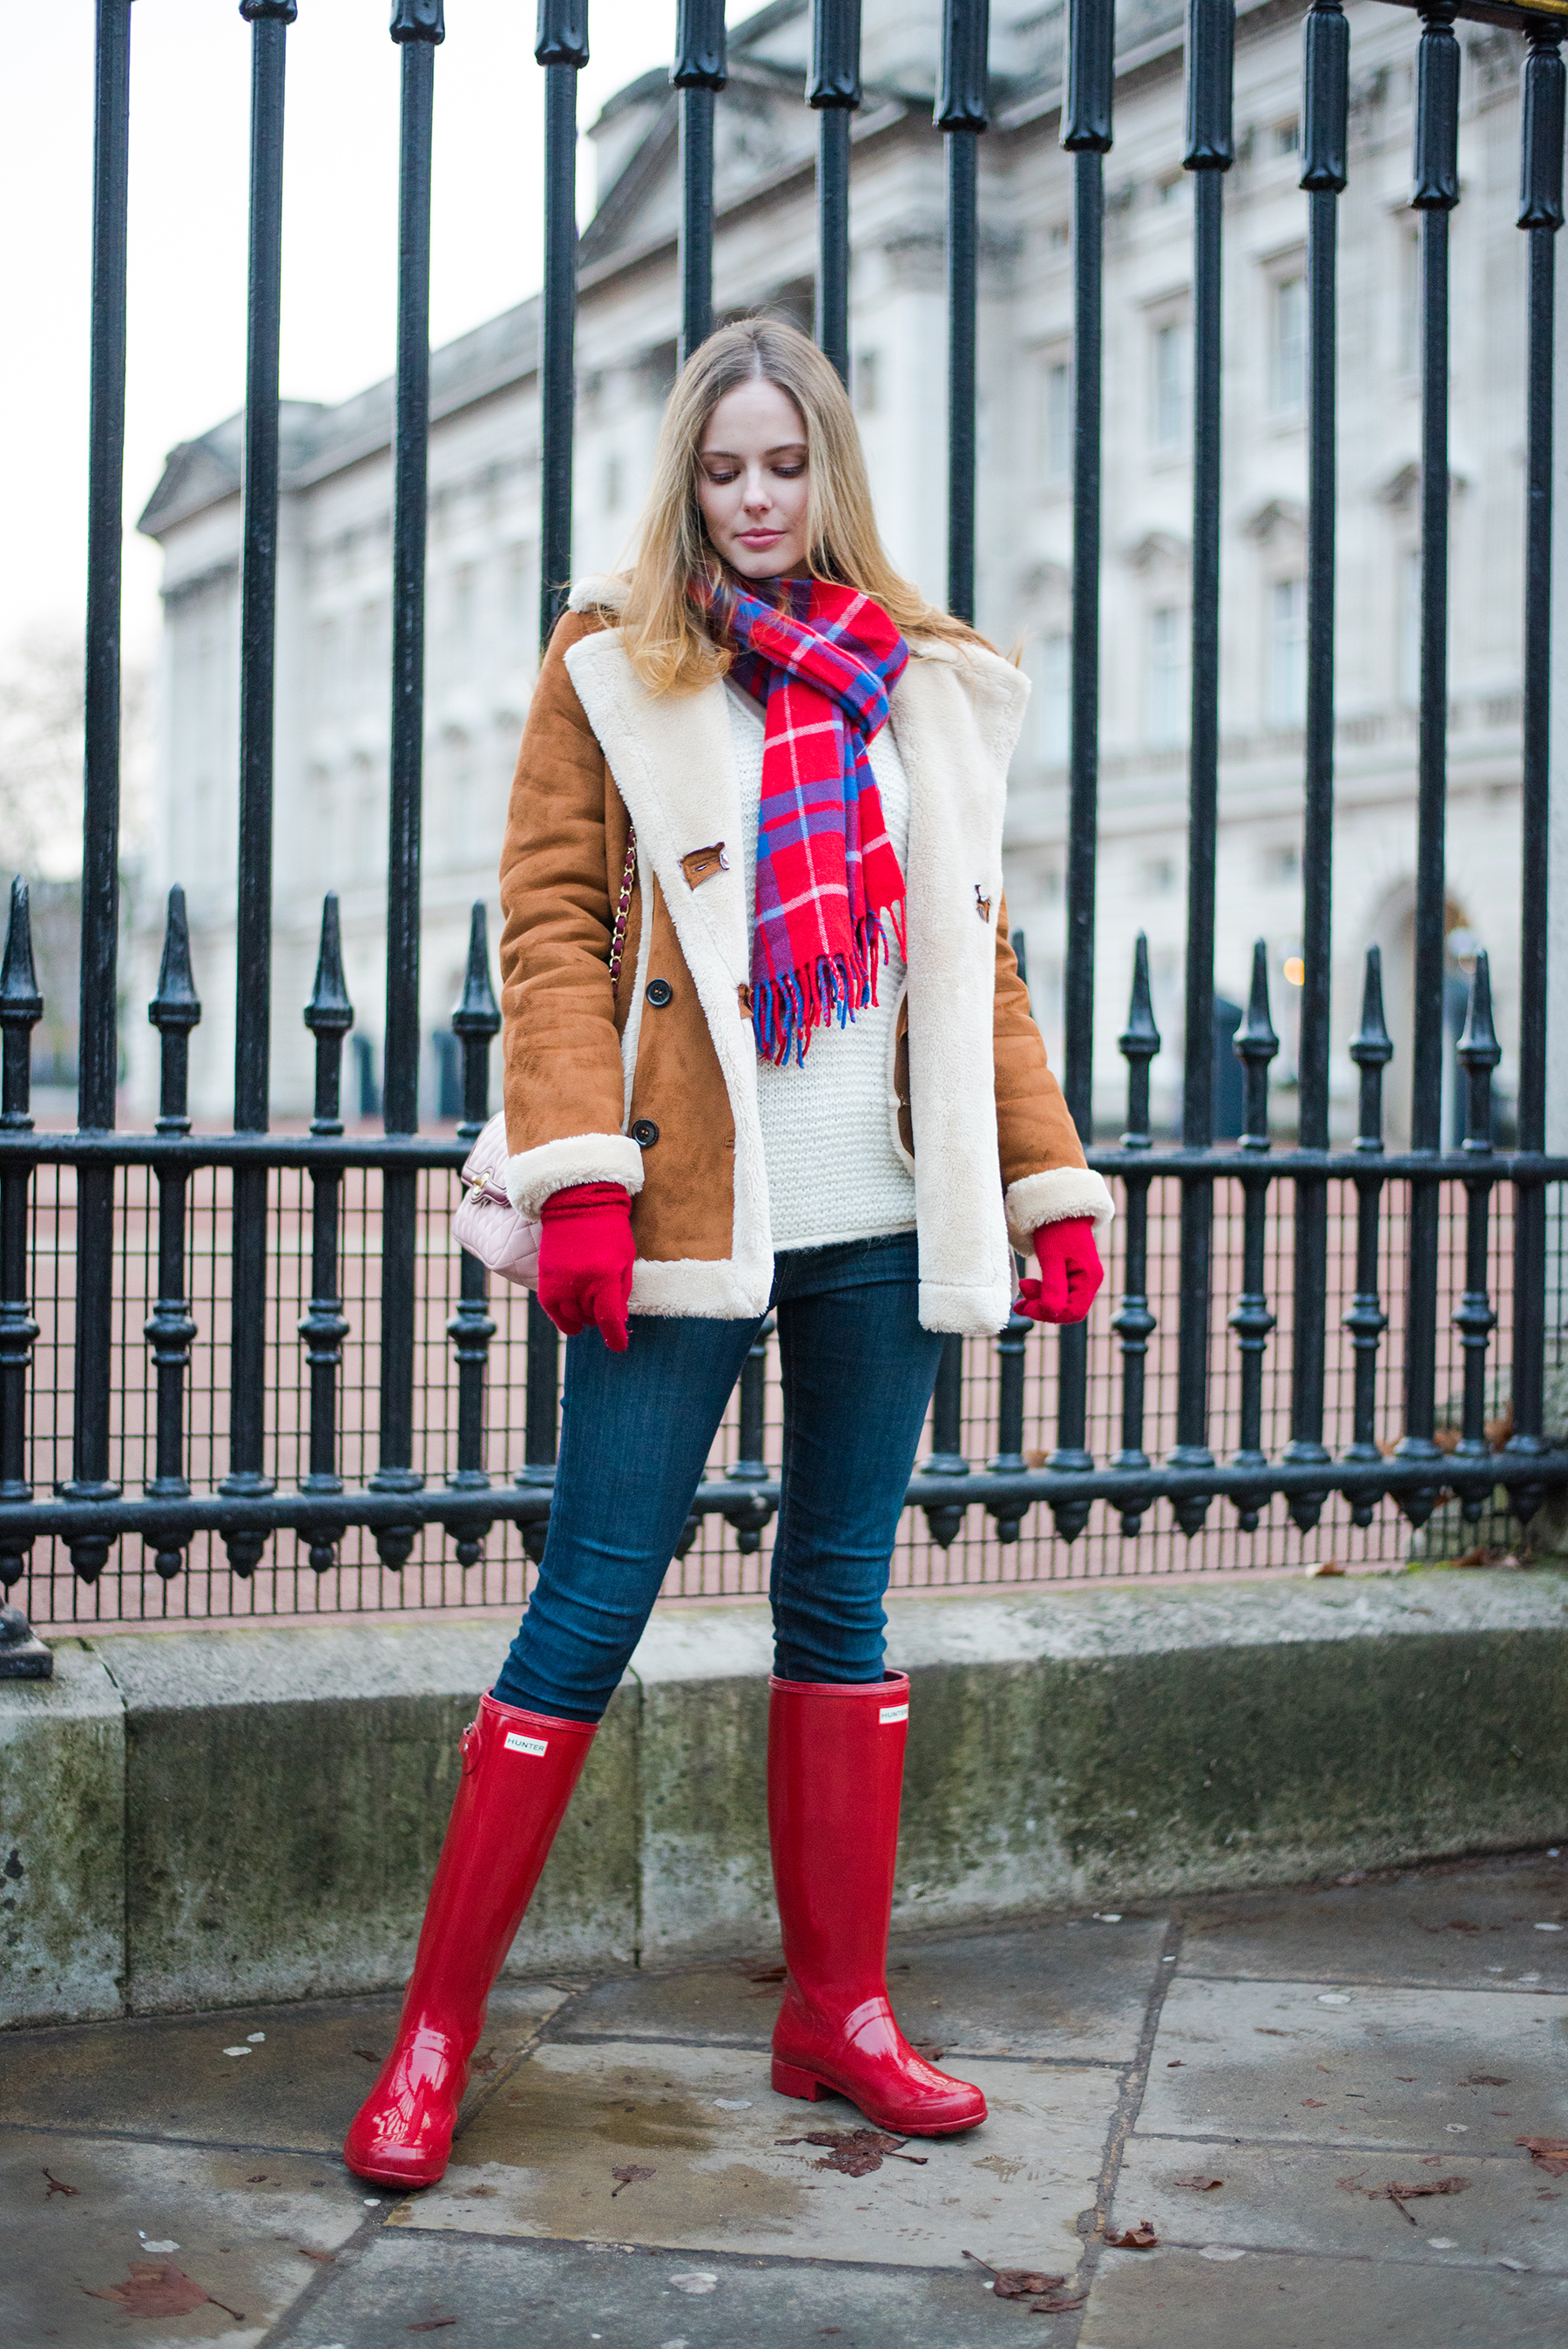 Miss USA 2011 Alyssa Campanella of The A List blog wearing Topshop Faux Shearling Coat at Buckingham Palace in London